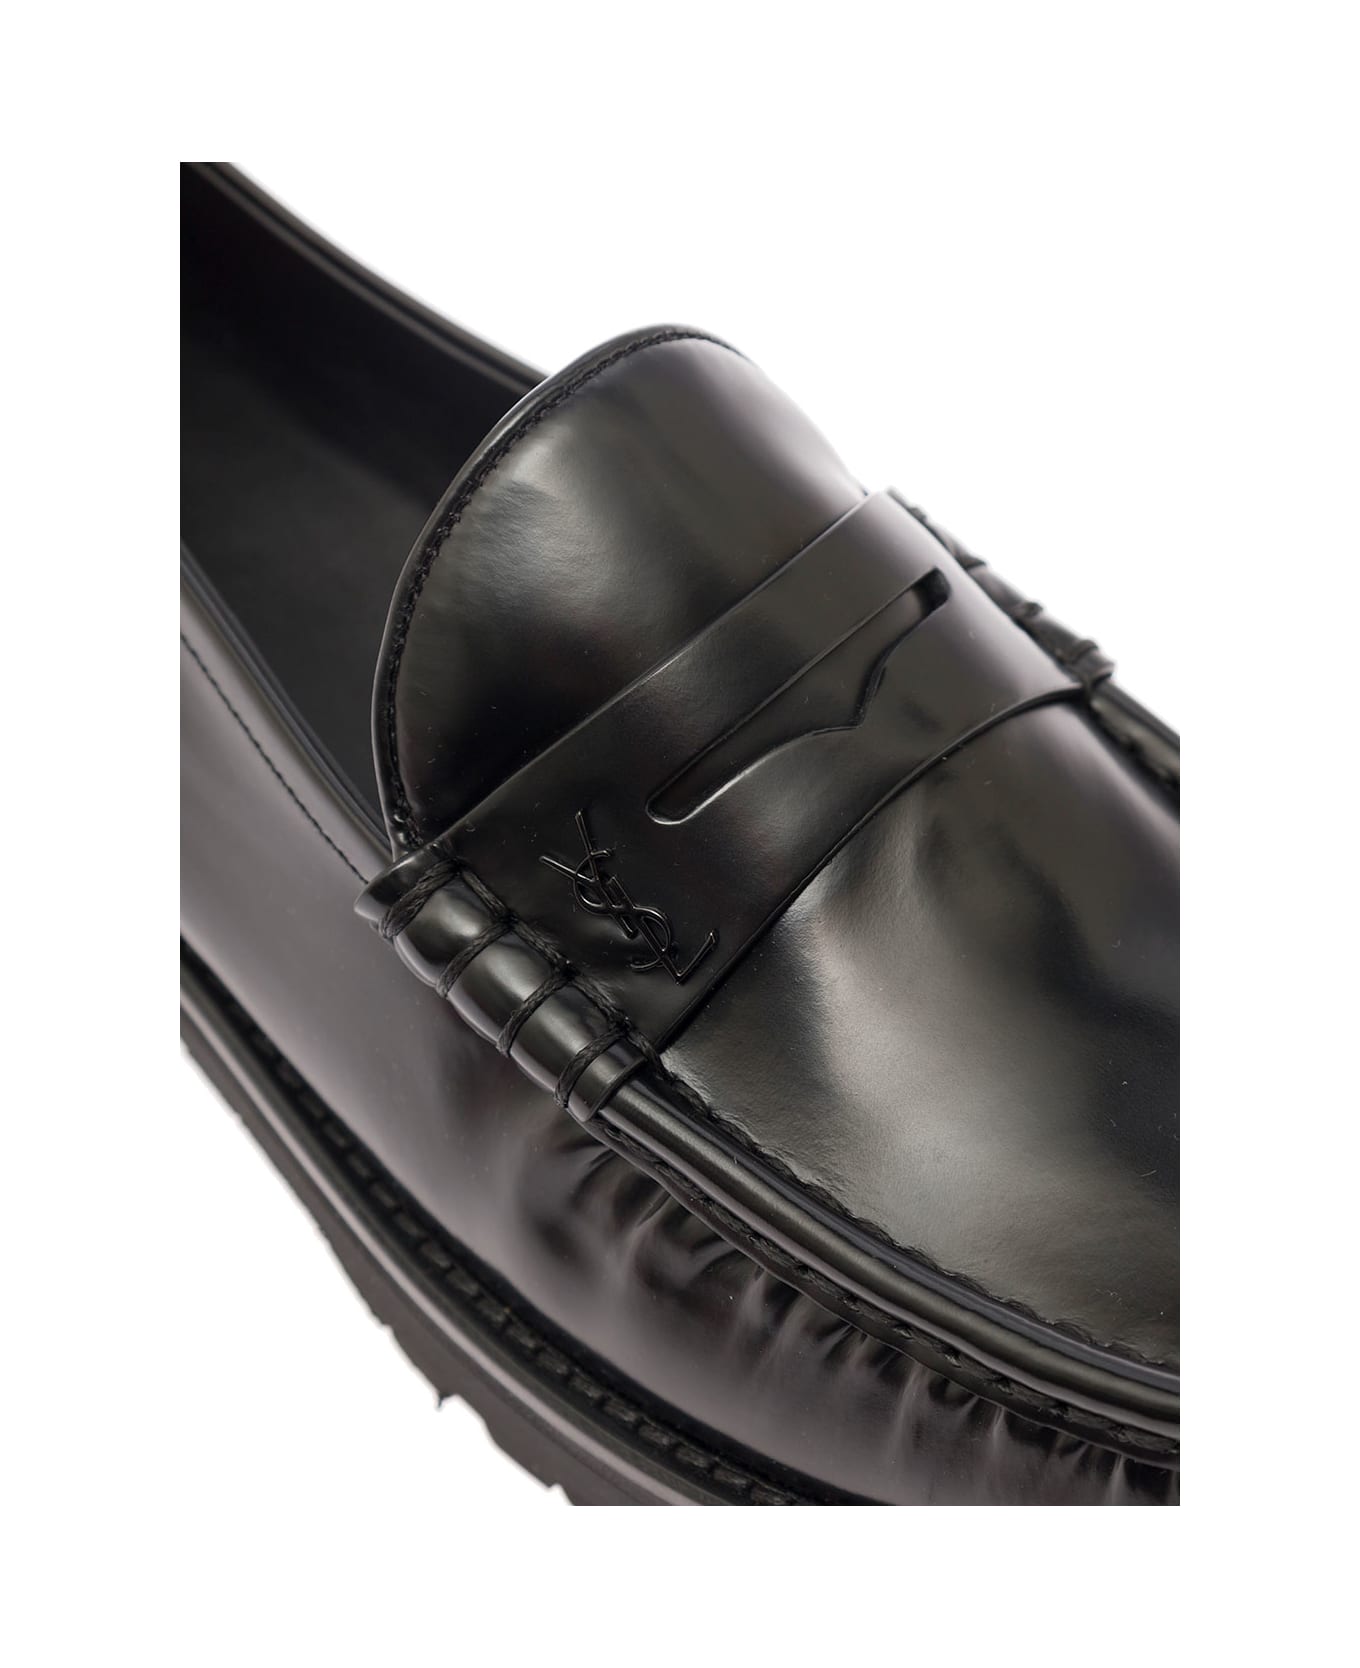 Saint Laurent Black Loafers With Platform And Ysl Logo In Leather Man - Nero